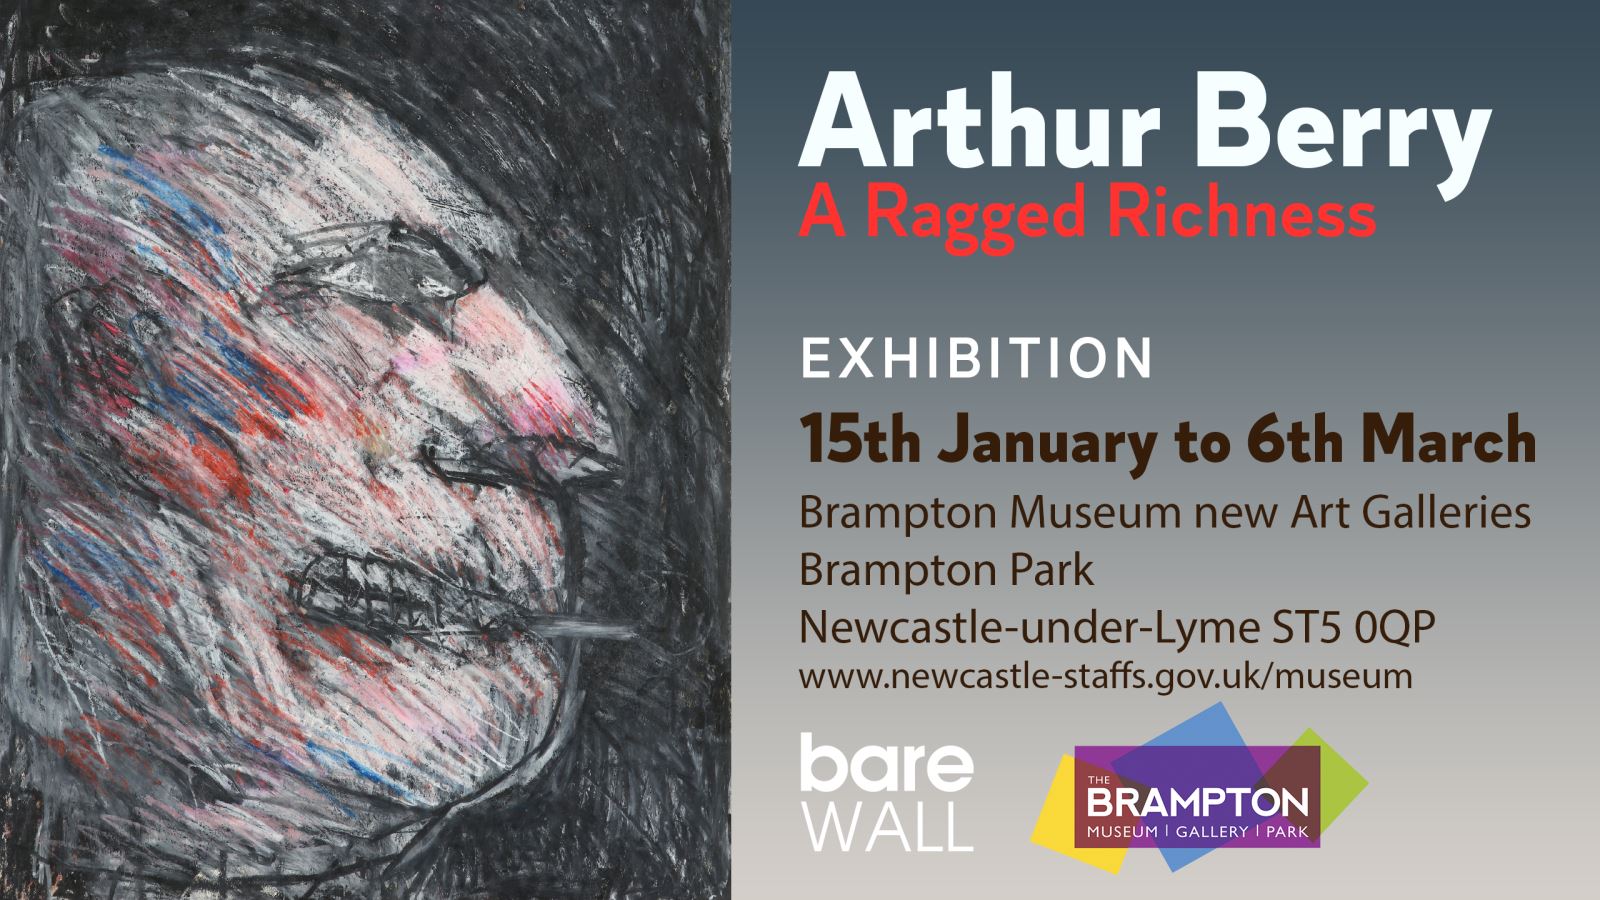 Arthur Berry A Ragged Richness Exhibition